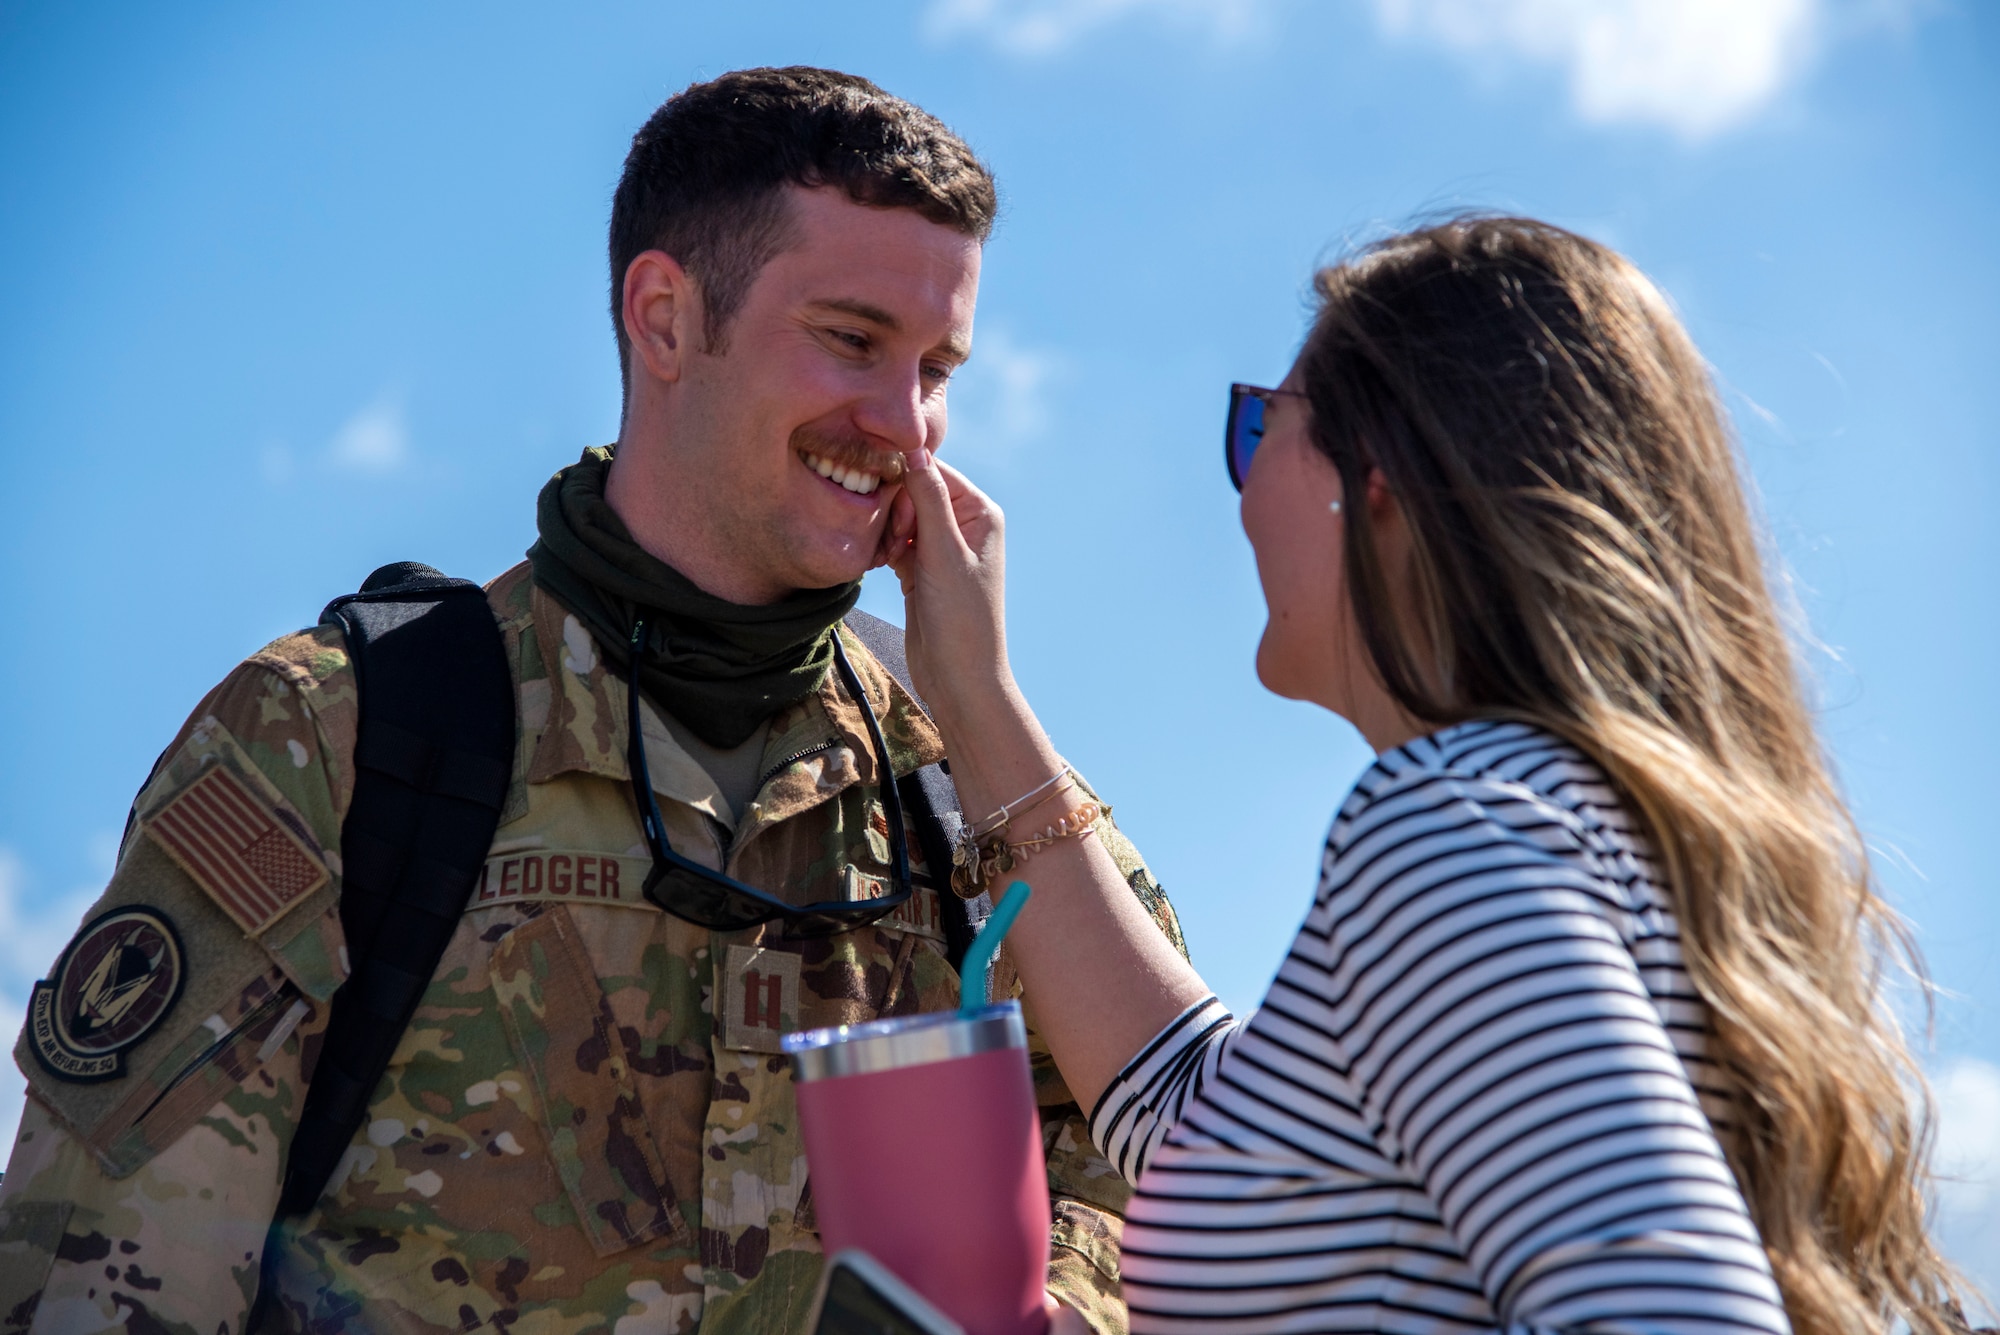 U.S. Air Force Capt. Travis Ledger, a 50th Air Refueling Squadron safety officer, sees his wife for first time in two-months at MacDill Air Force Base, Florida, Oct. 18, 2020.